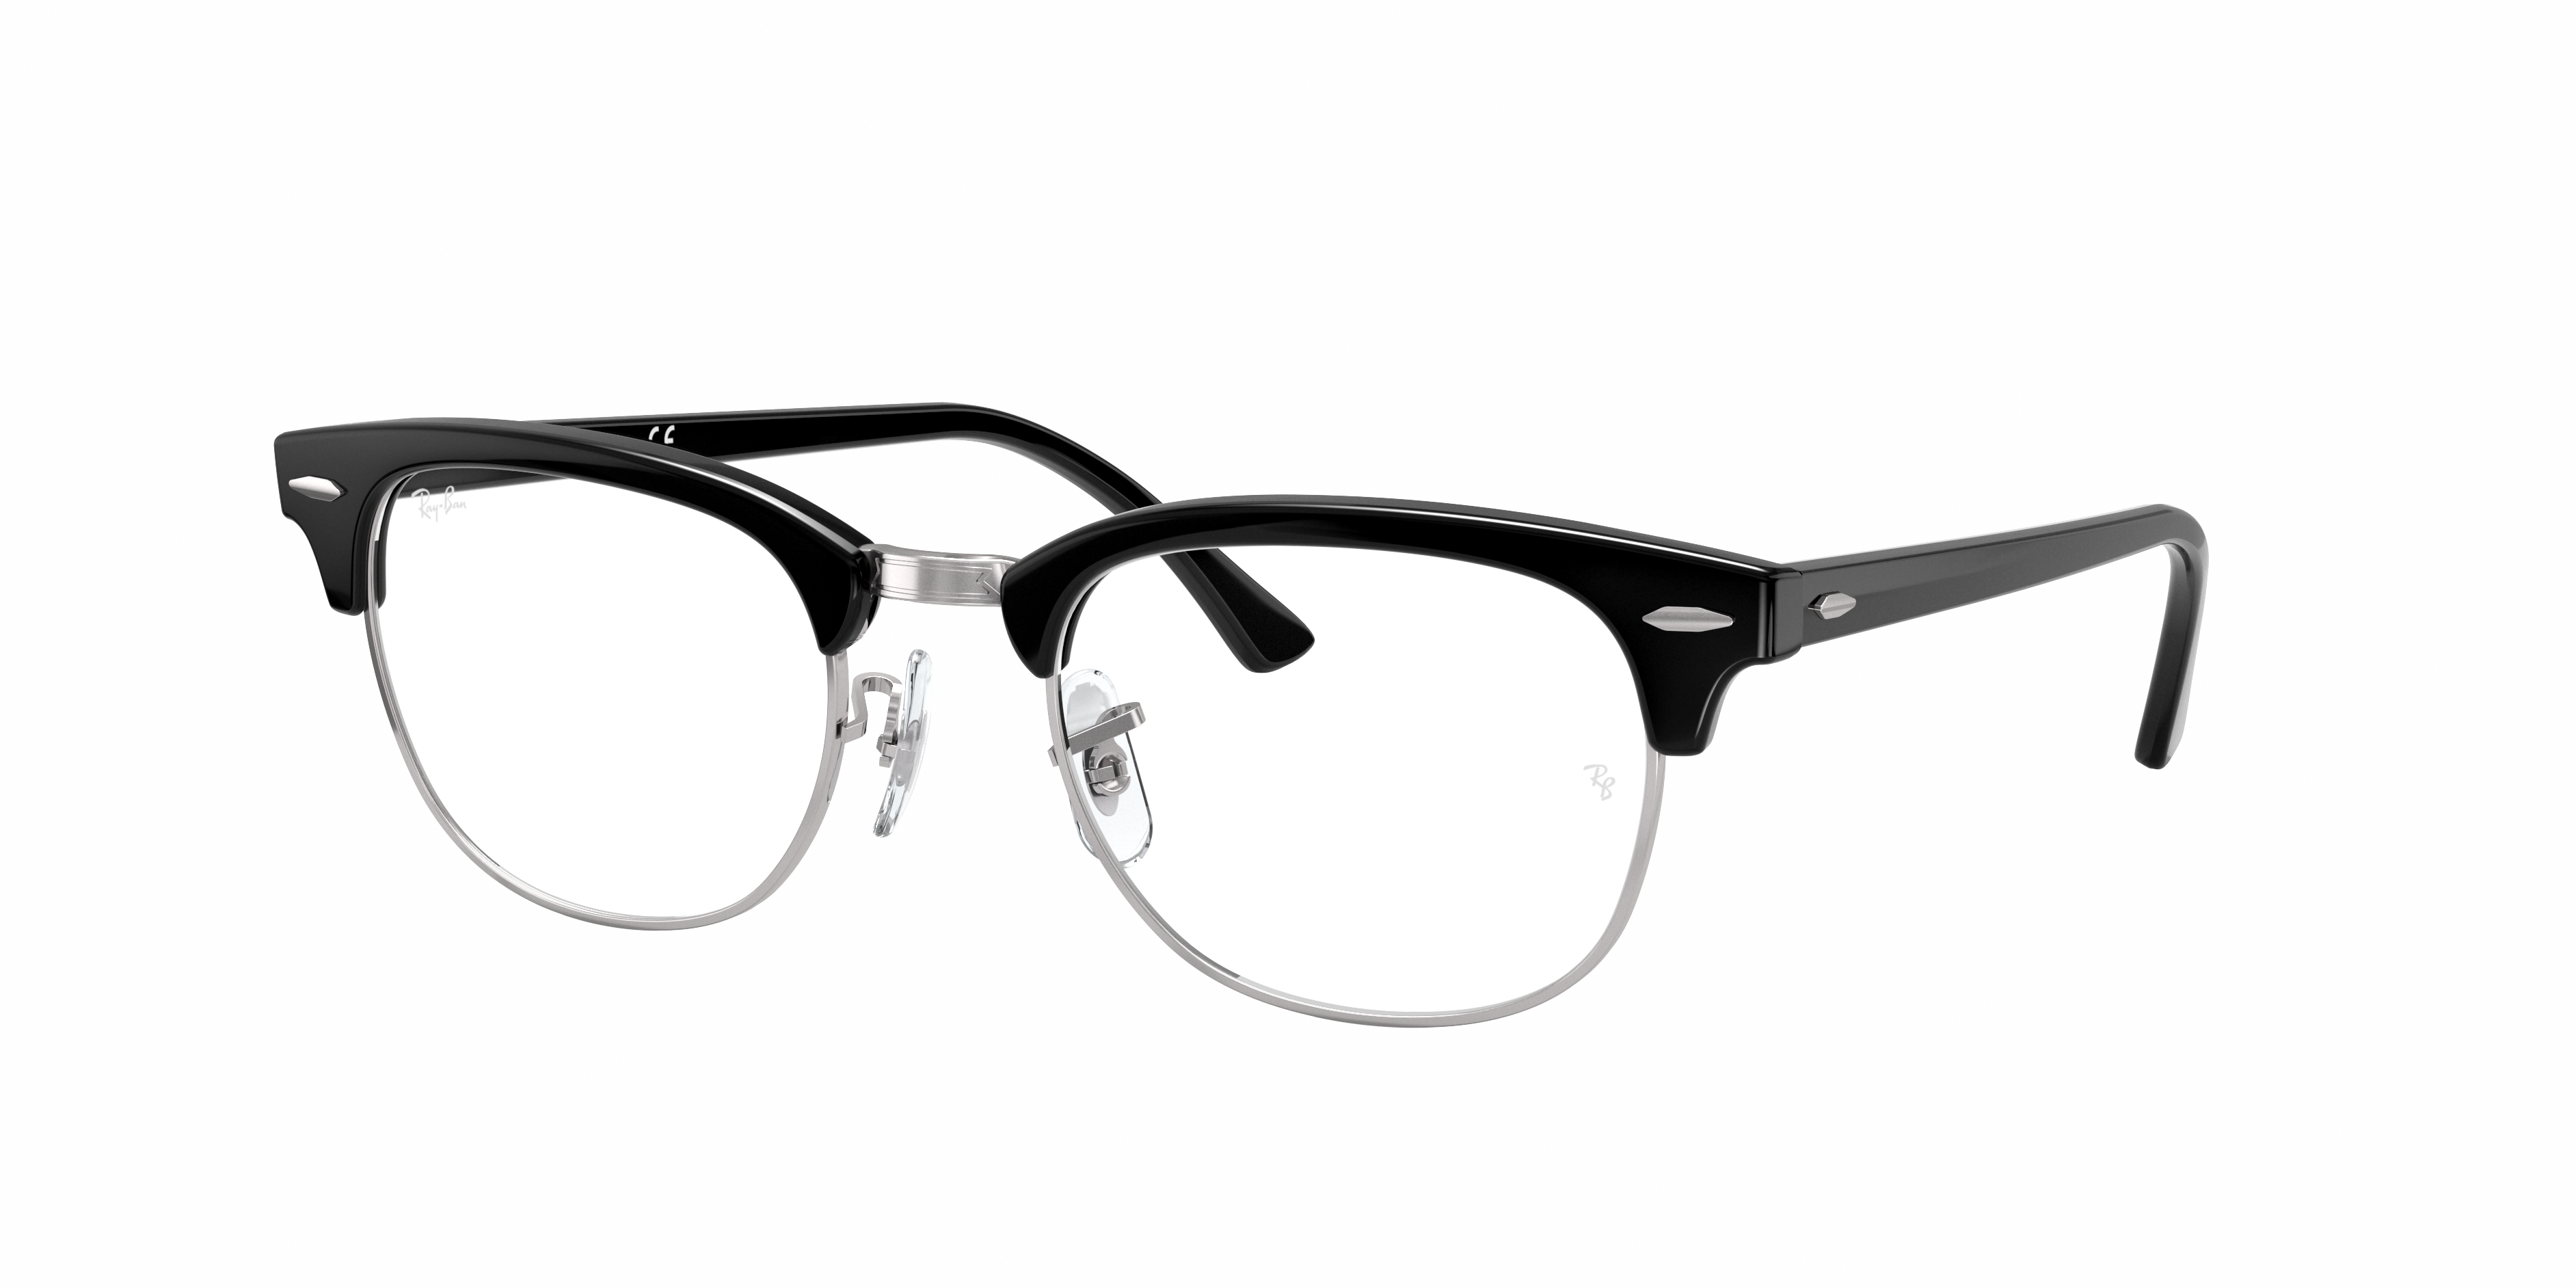 Ray-Ban 0RX5154 in Black Glasses | OPSM